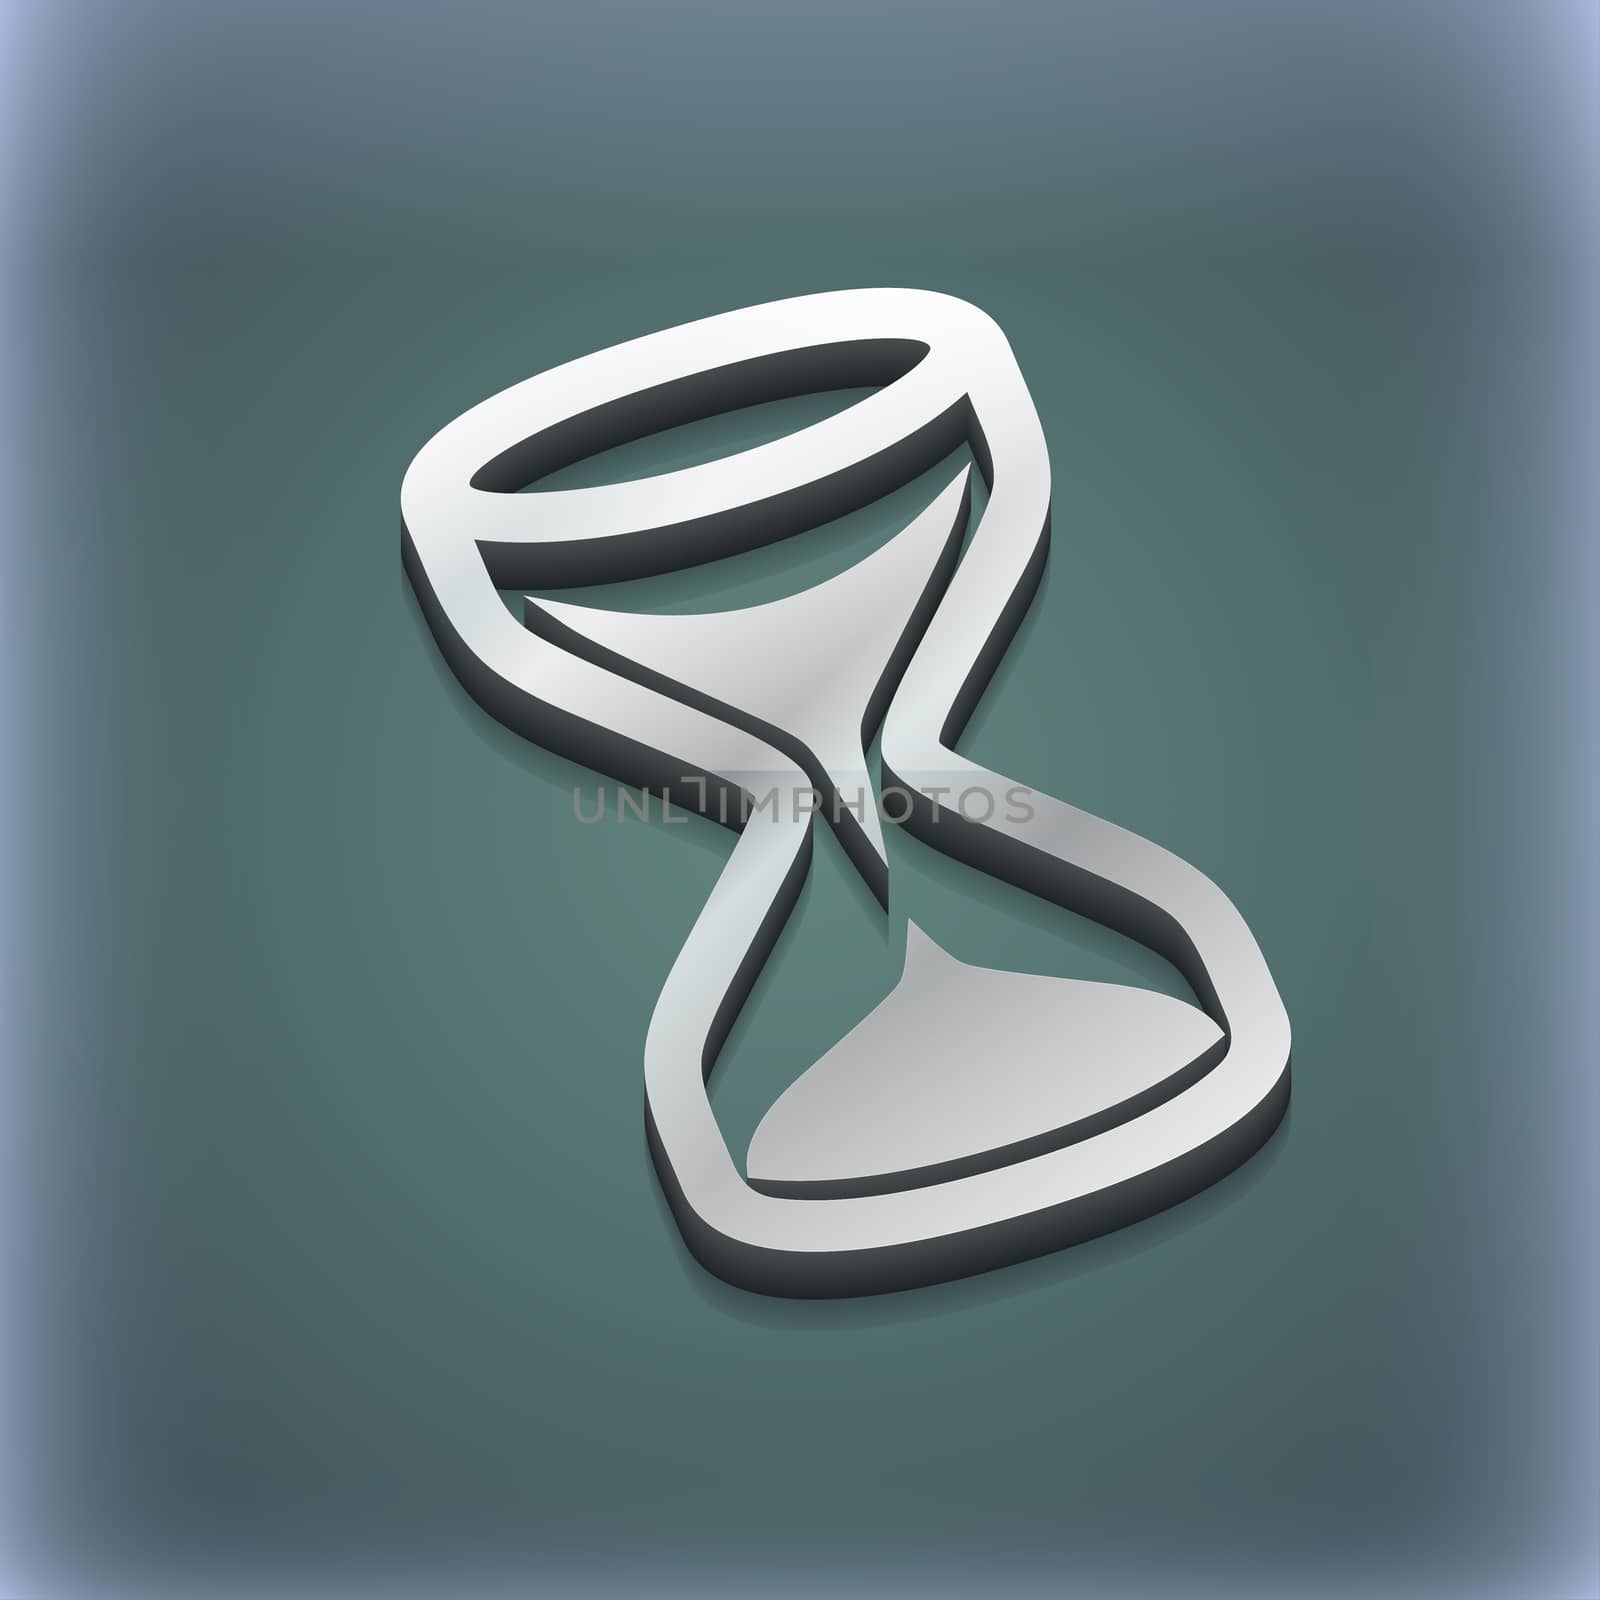 hourglass icon symbol. 3D style. Trendy, modern design with space for your text illustration. Raster version